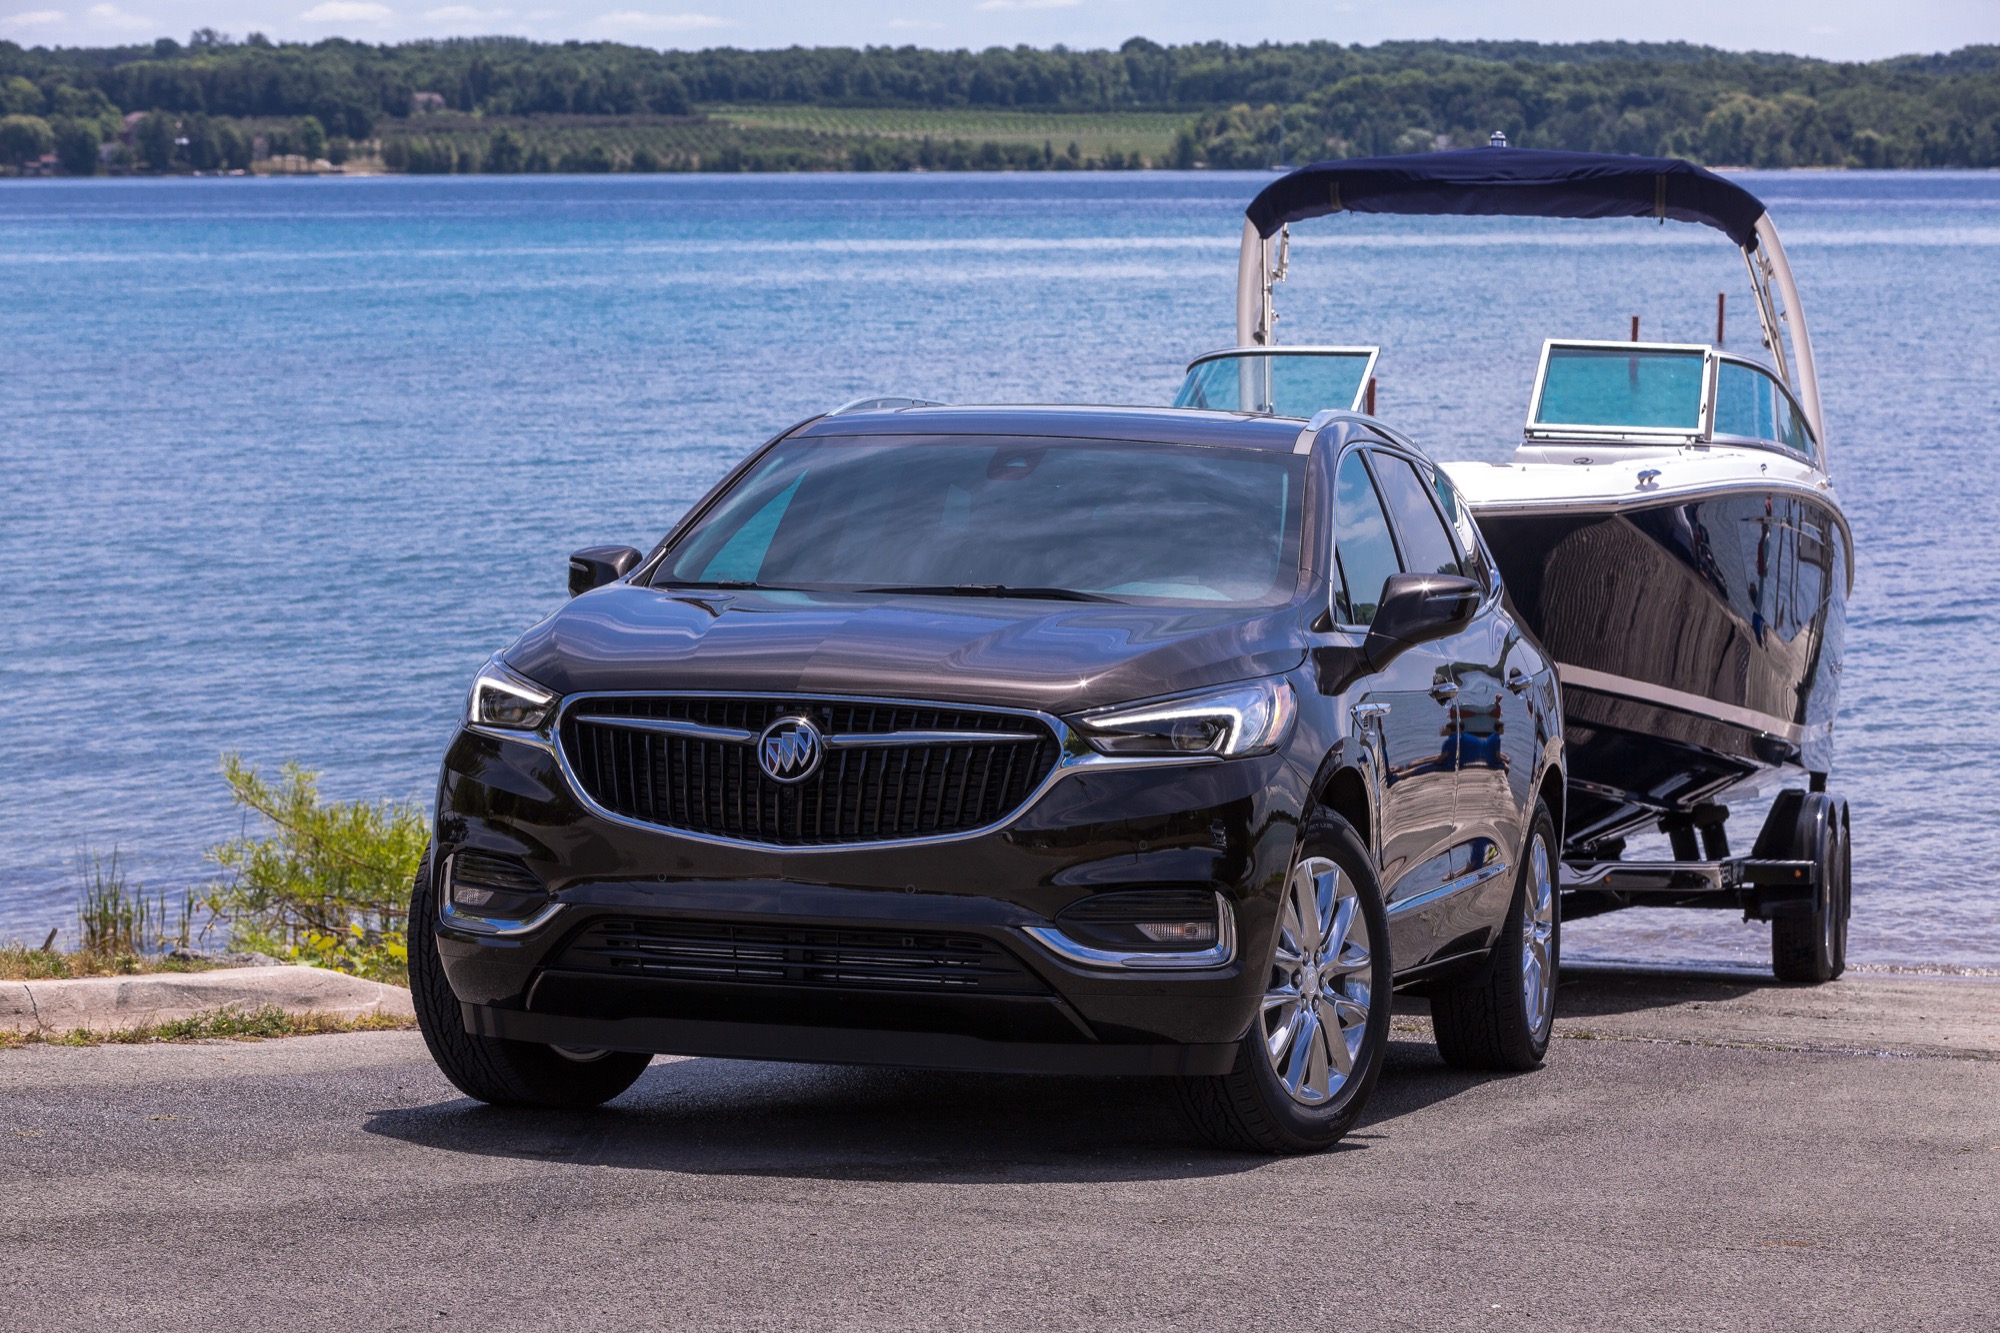 new-buick-rebate-reduces-enclave-price-by-14-october-2019-gm-authority